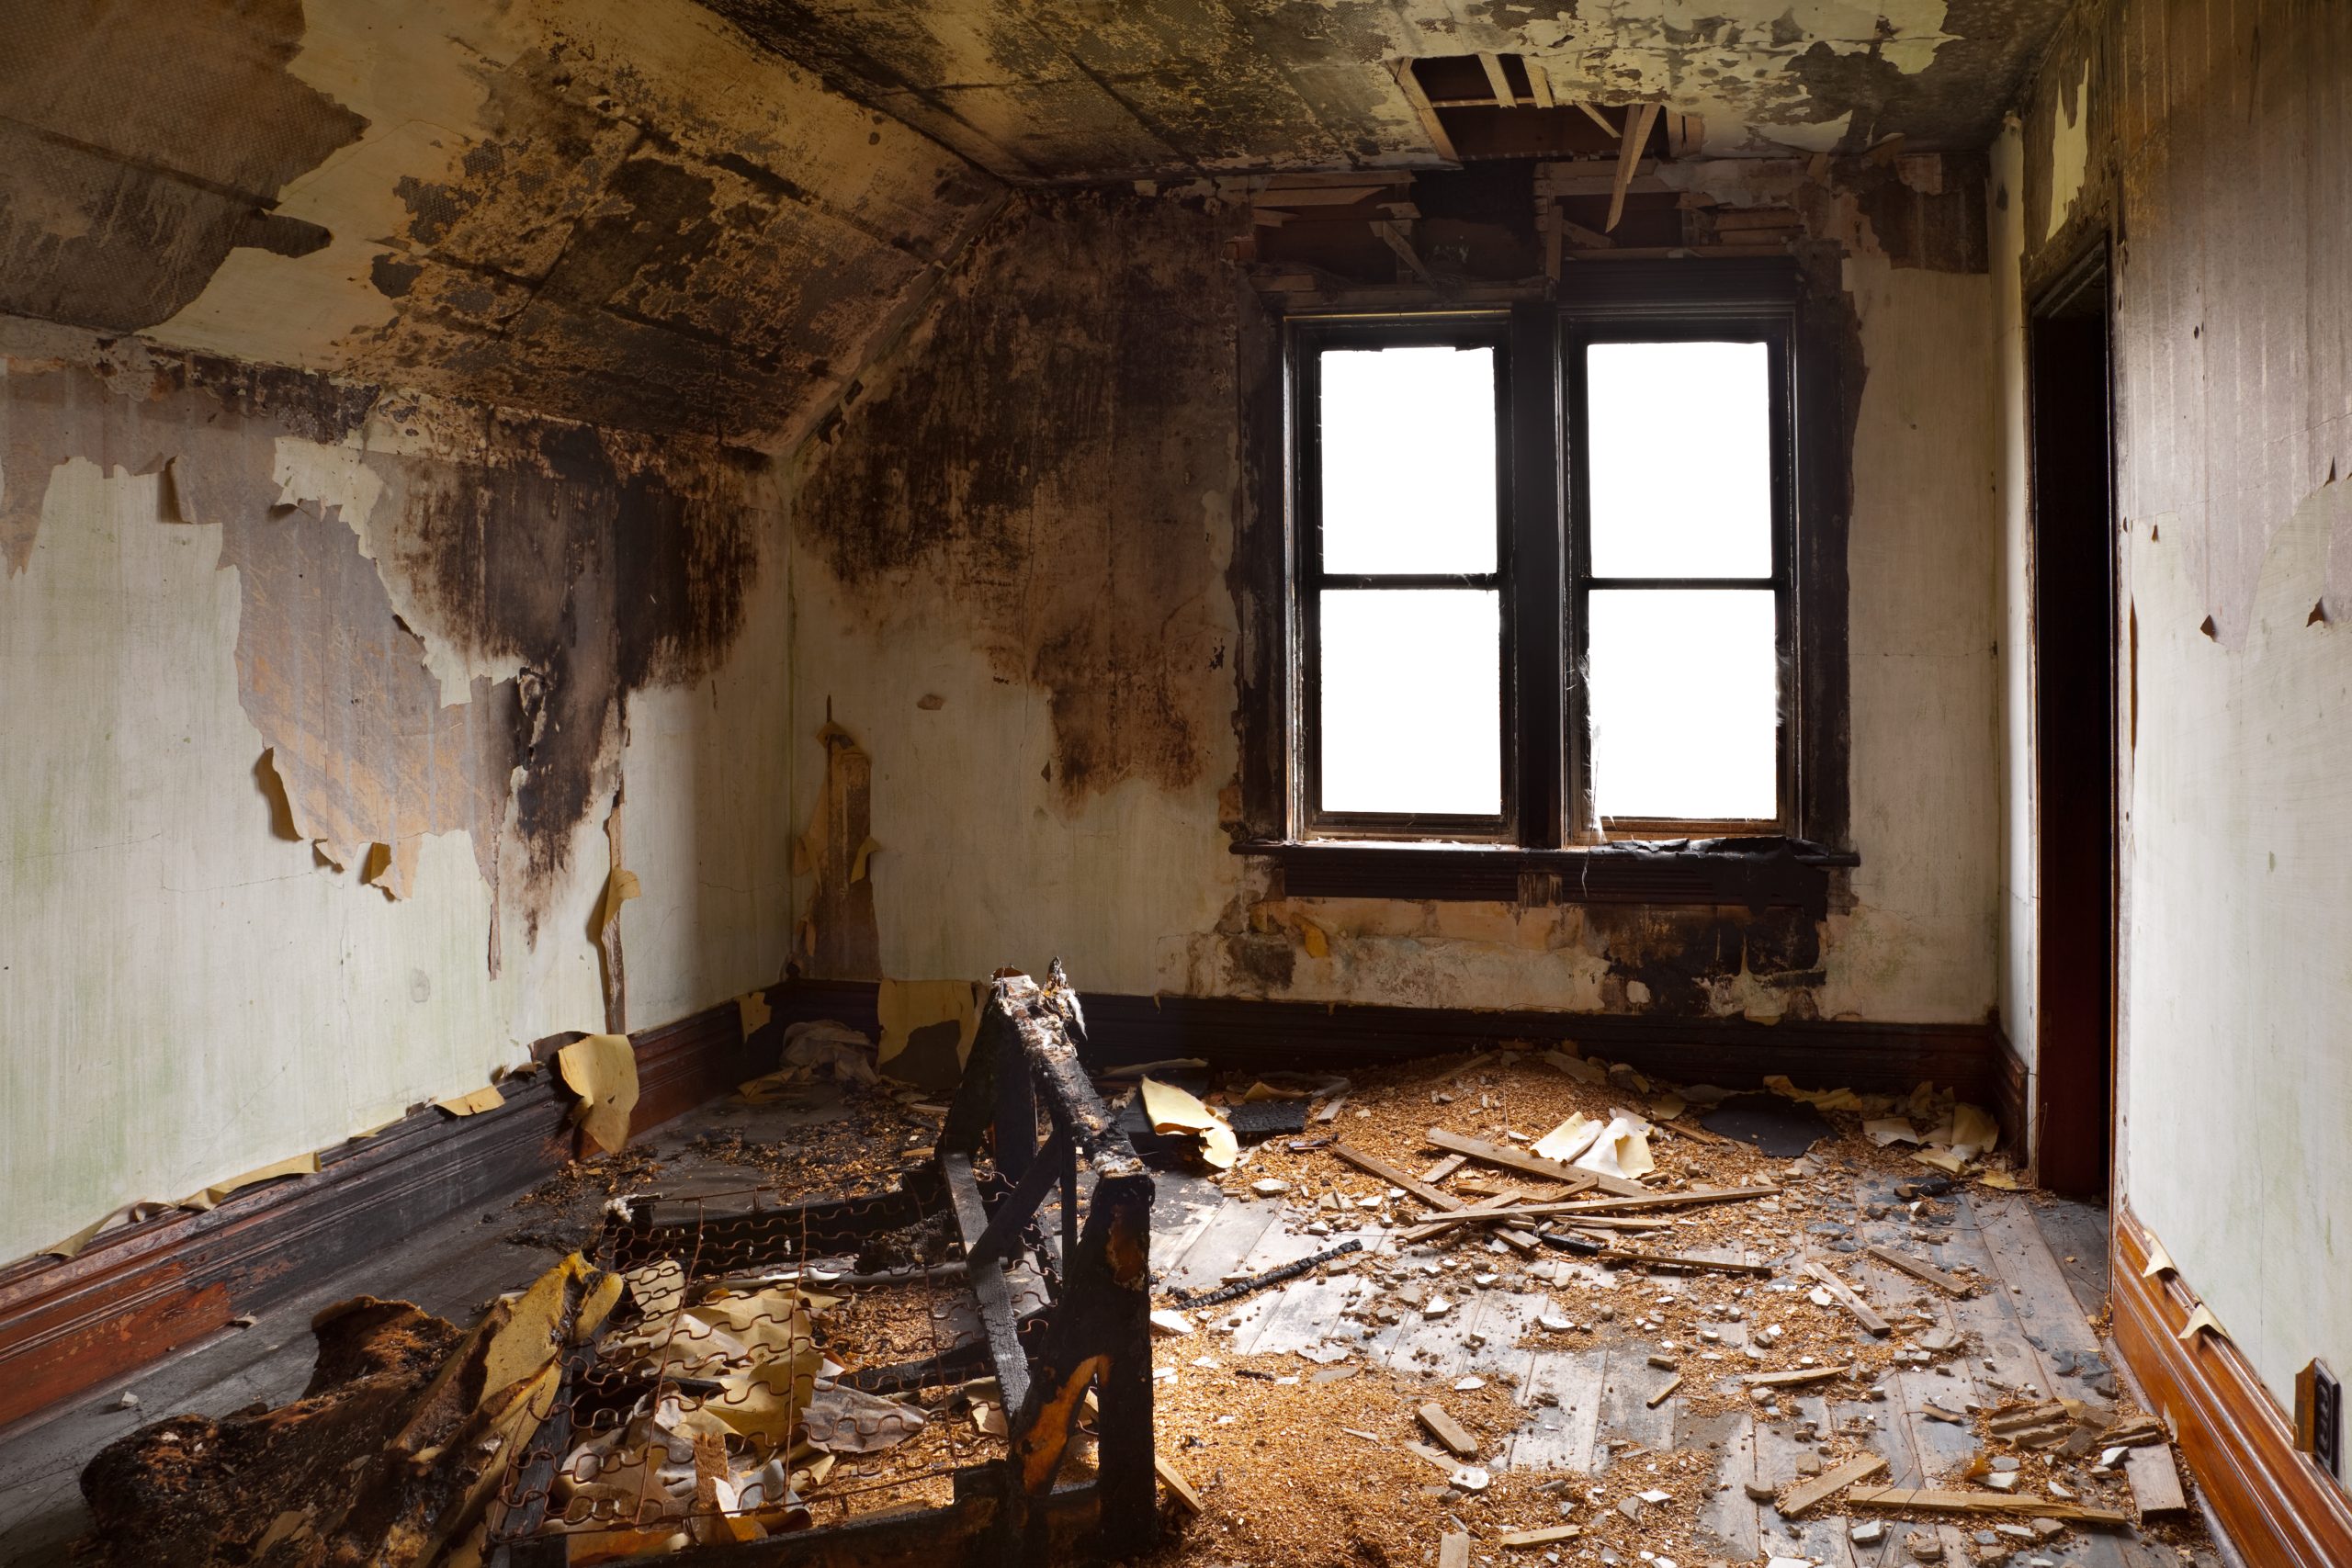 Fire Damage Cleaning – How to Get Rid of Smoke and Soot Damage